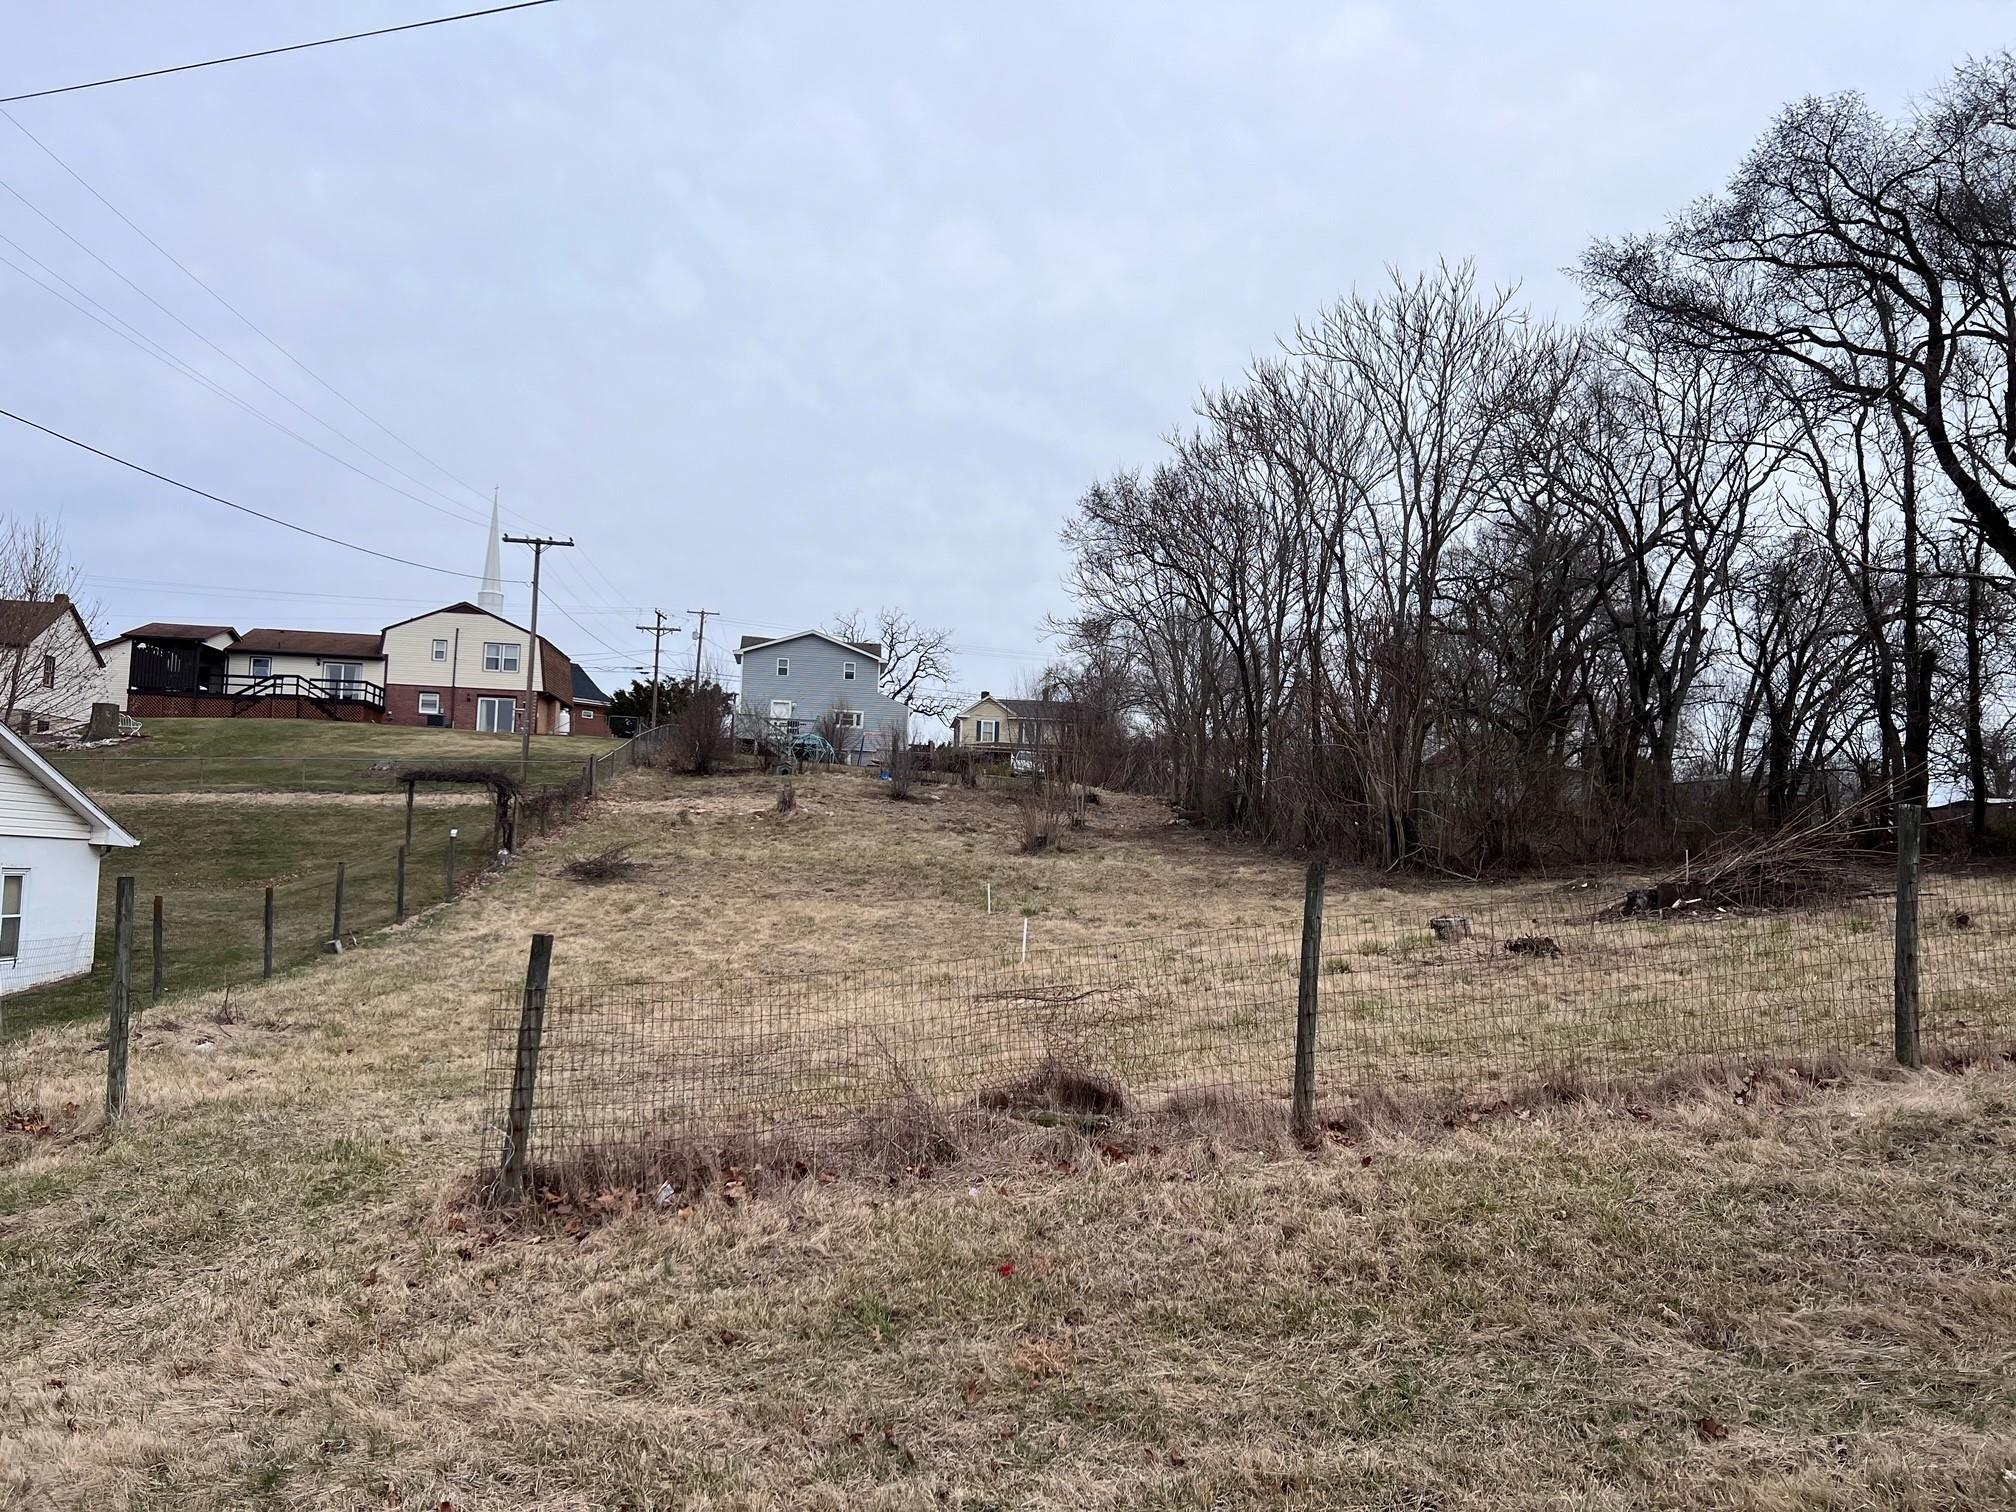 Located in the middle of Riner, this ready to build .30 acre property lays well and is zoned agricultural.  County water and sewer connections have been prepaid. Close to Auburn schools.